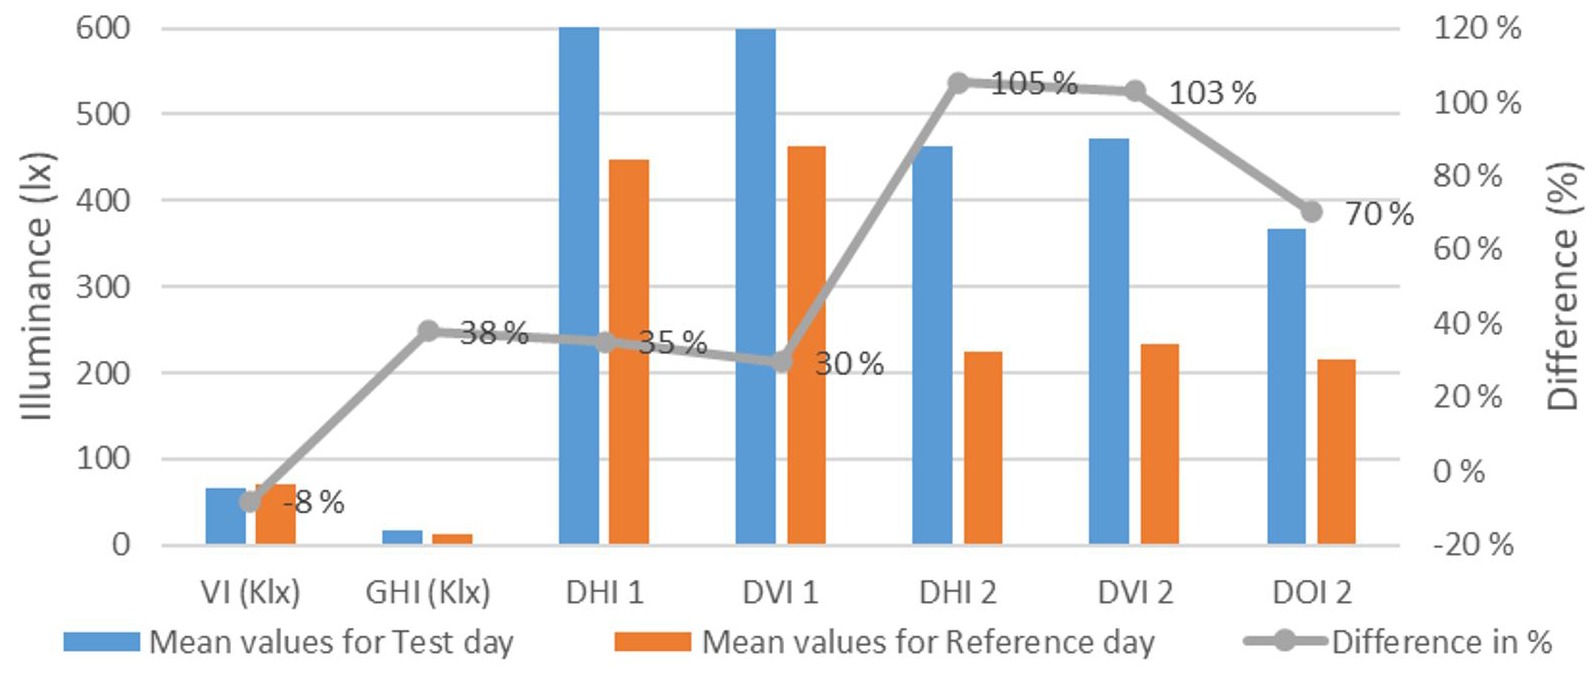 Comparison of Mean Illuminance values for the test and reference pair days which were recorded between 12:00am and 14:30pm. VI and GHI are shown in Klx.